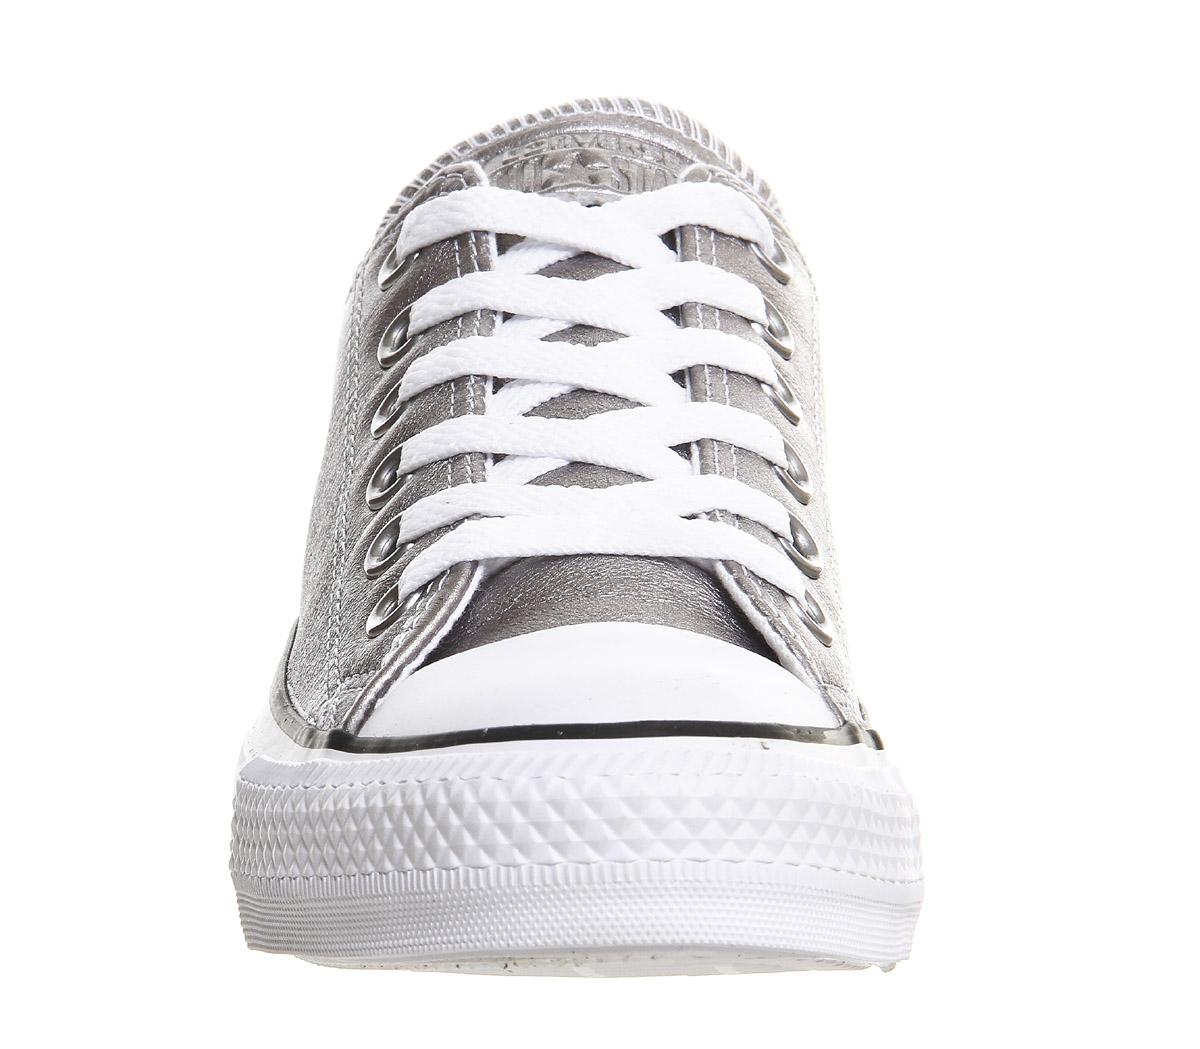 converse all star low leather new silver exclusive